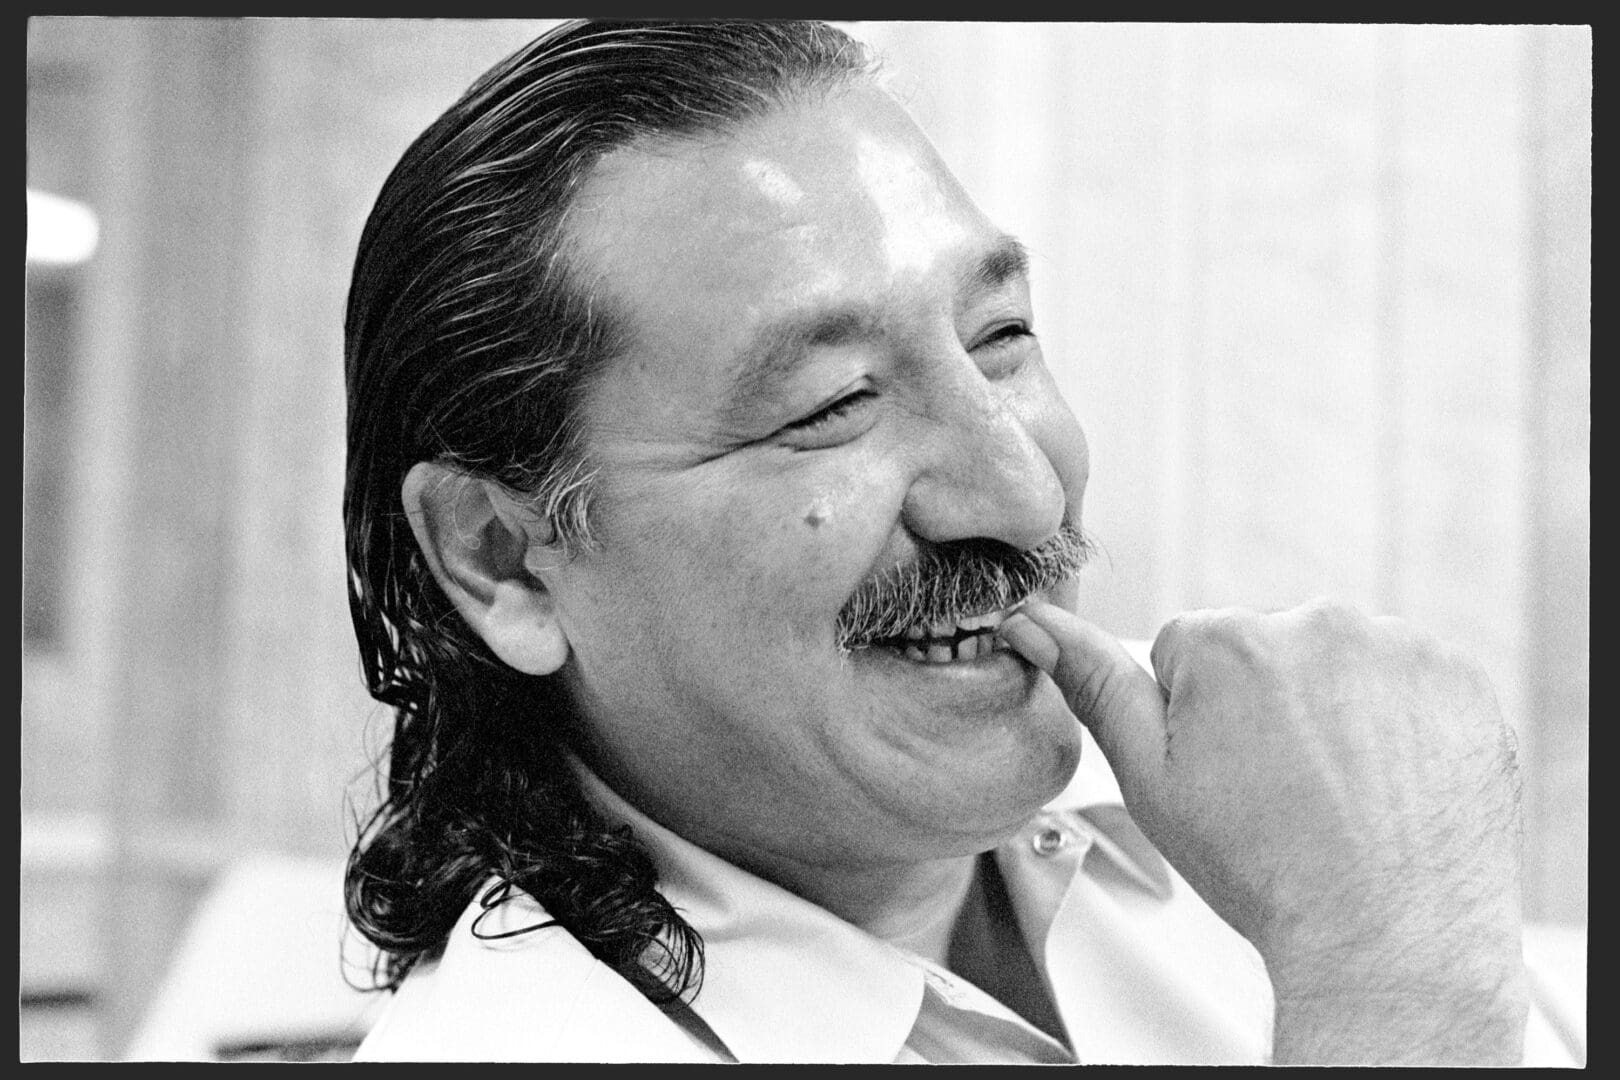 Leonard Peltier, an Anishinable-Lakota Native American, is serving two consecutive life sentences in the USA for the murders of two Federal Bureau of Investigation (FBI) agents in 1975. AI has concerns about the fairness of the proceedings leading to his conviction.